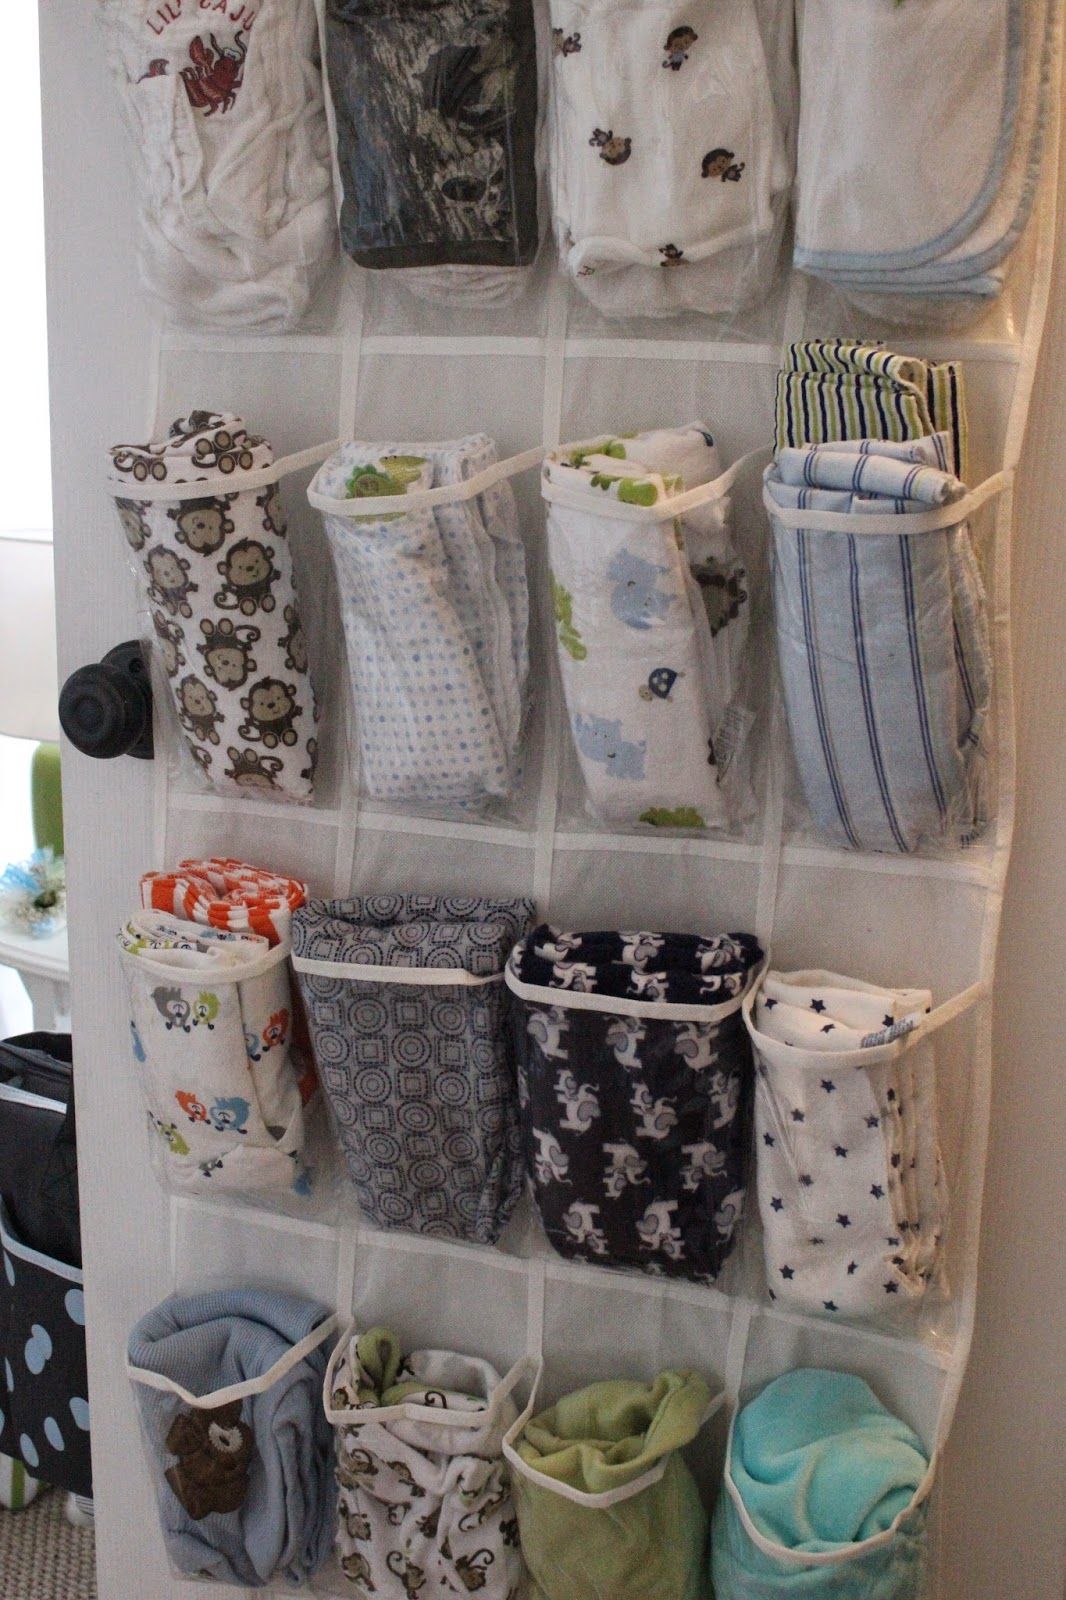 store baby blankets in a hanging shoe storage… brilliant!!!